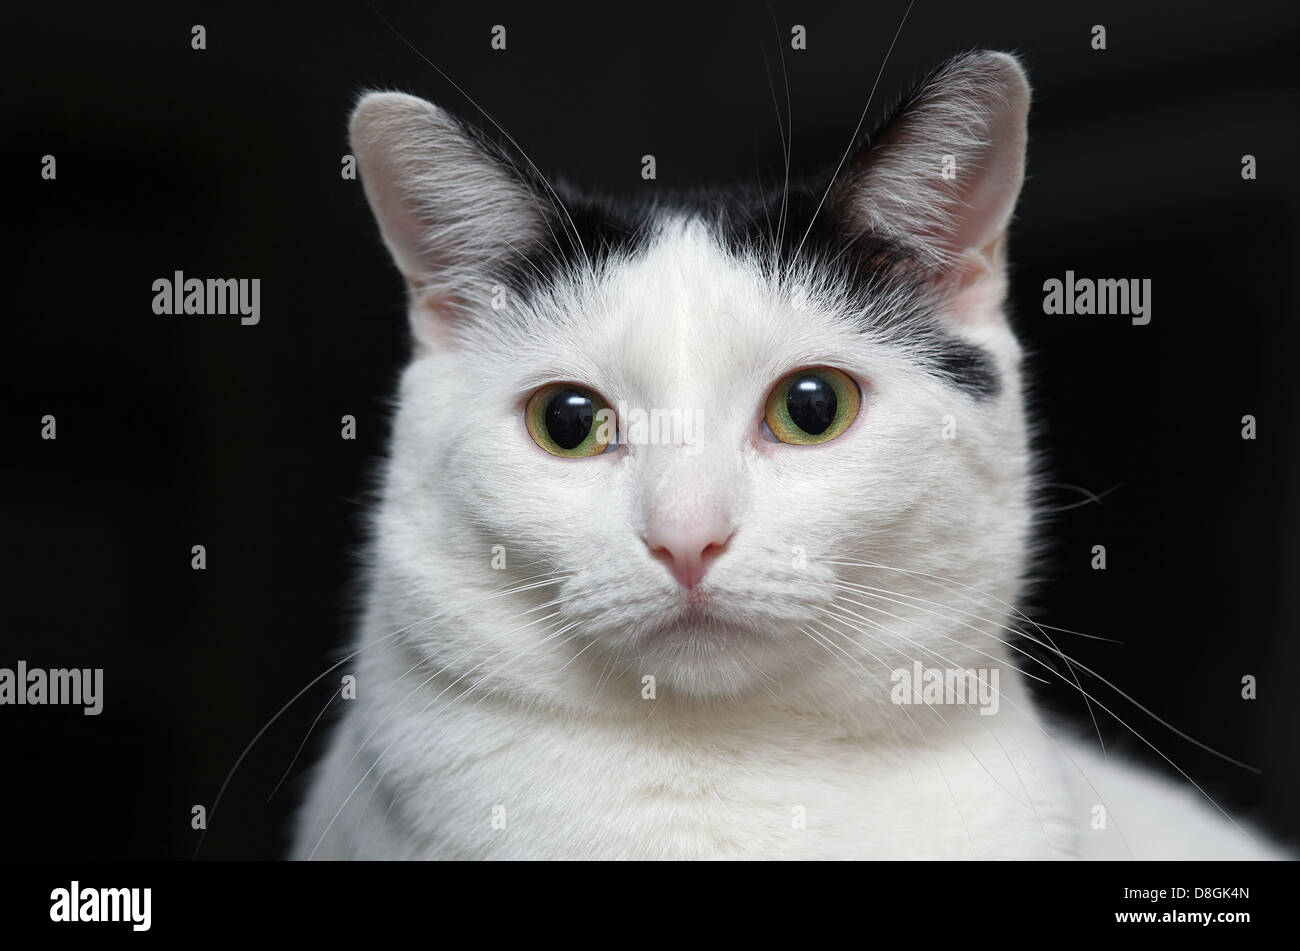 Cat with black background Stock Photo